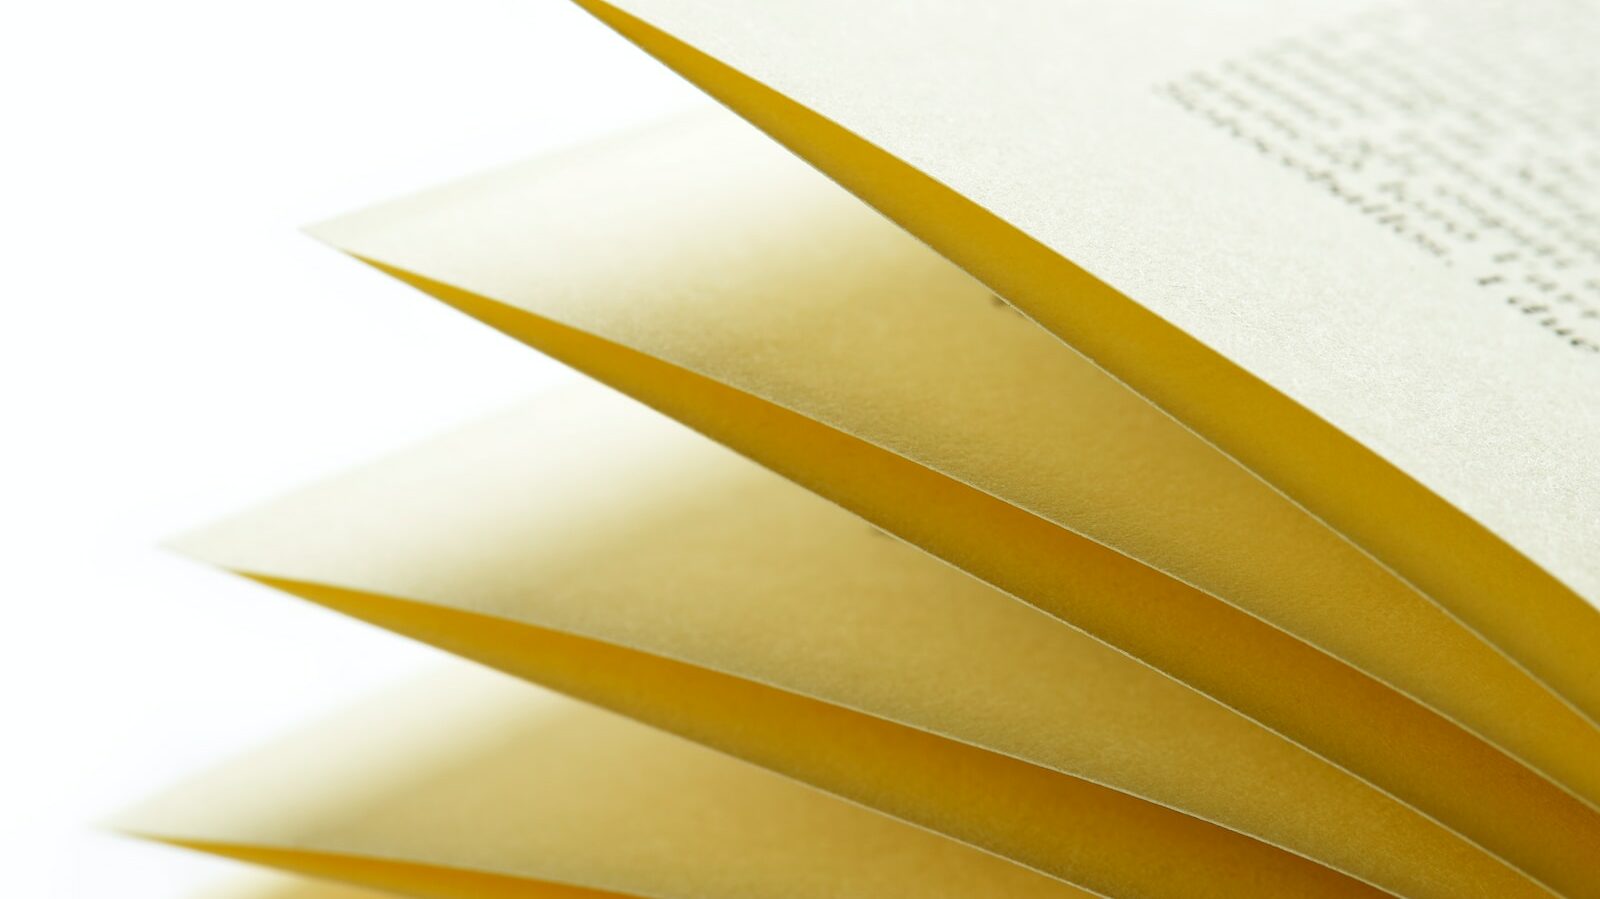 closeup photo of book pages